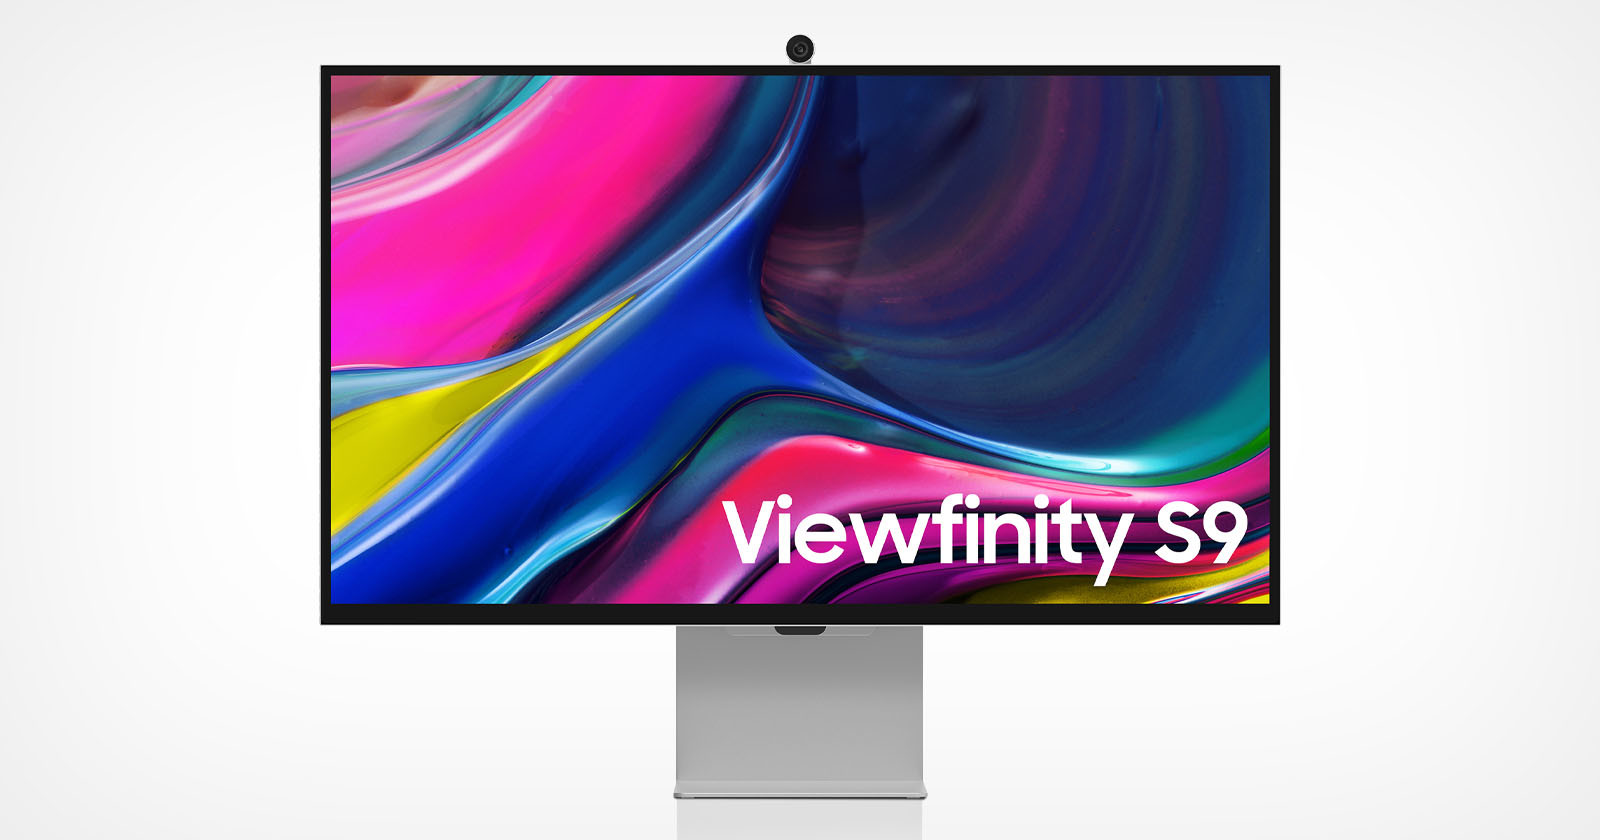 Samsungs ViewFinity S9 is an Apple-Like Color-Calibrated 5K Monitor